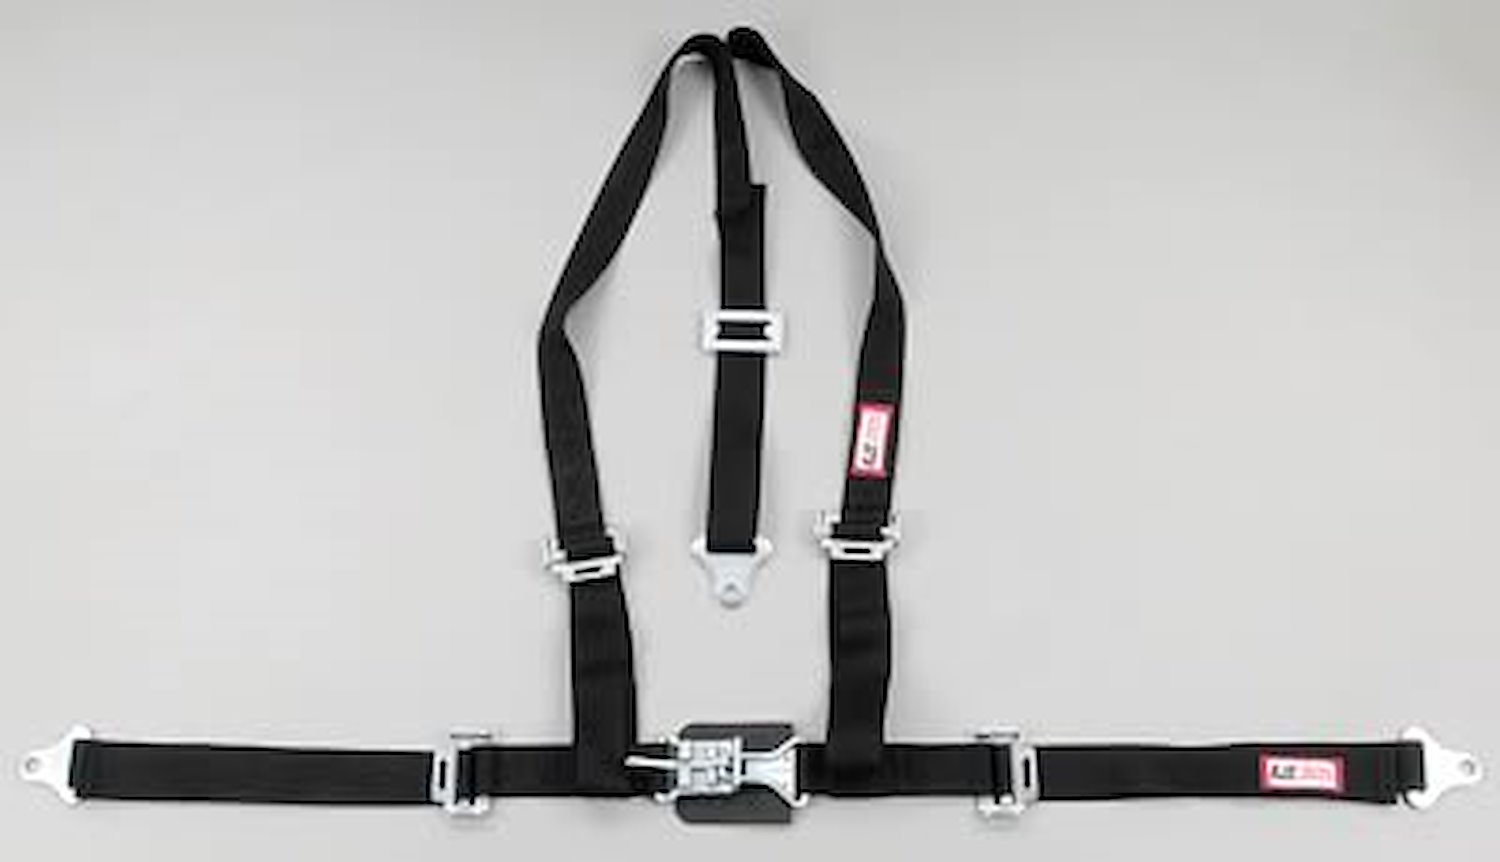 NON-SFI L&L HARNESS 2 PULL DOWN Lap Belt w/Adjuster 2 S.H. Y FLOOR Mount ALL WRAP ENDS HOT PINK